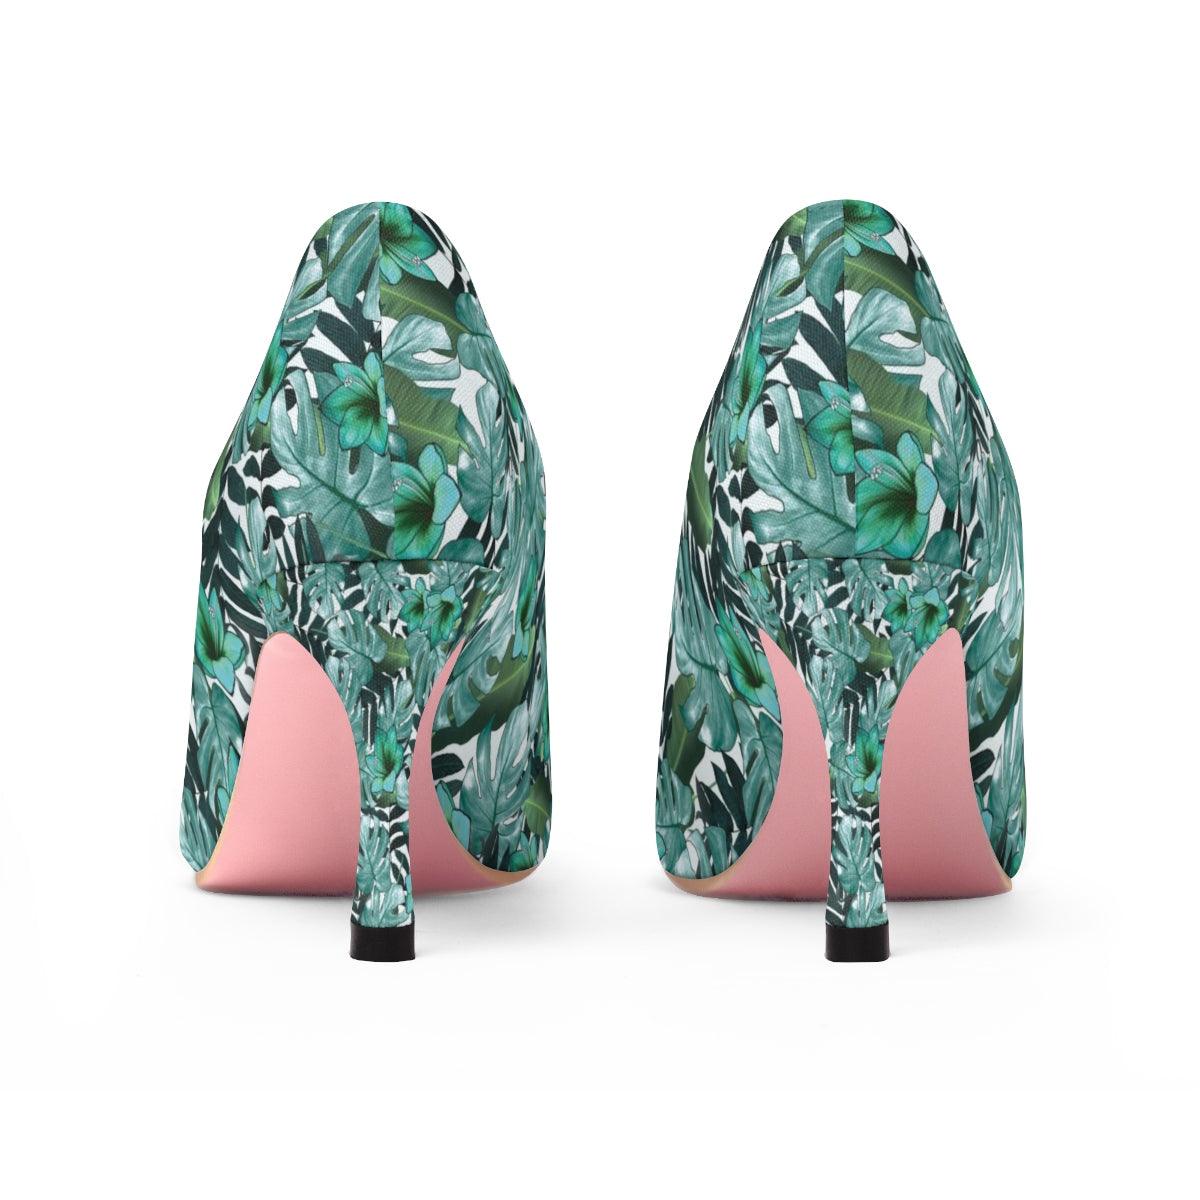 Green Floral Women's High Heels - Buyashoes